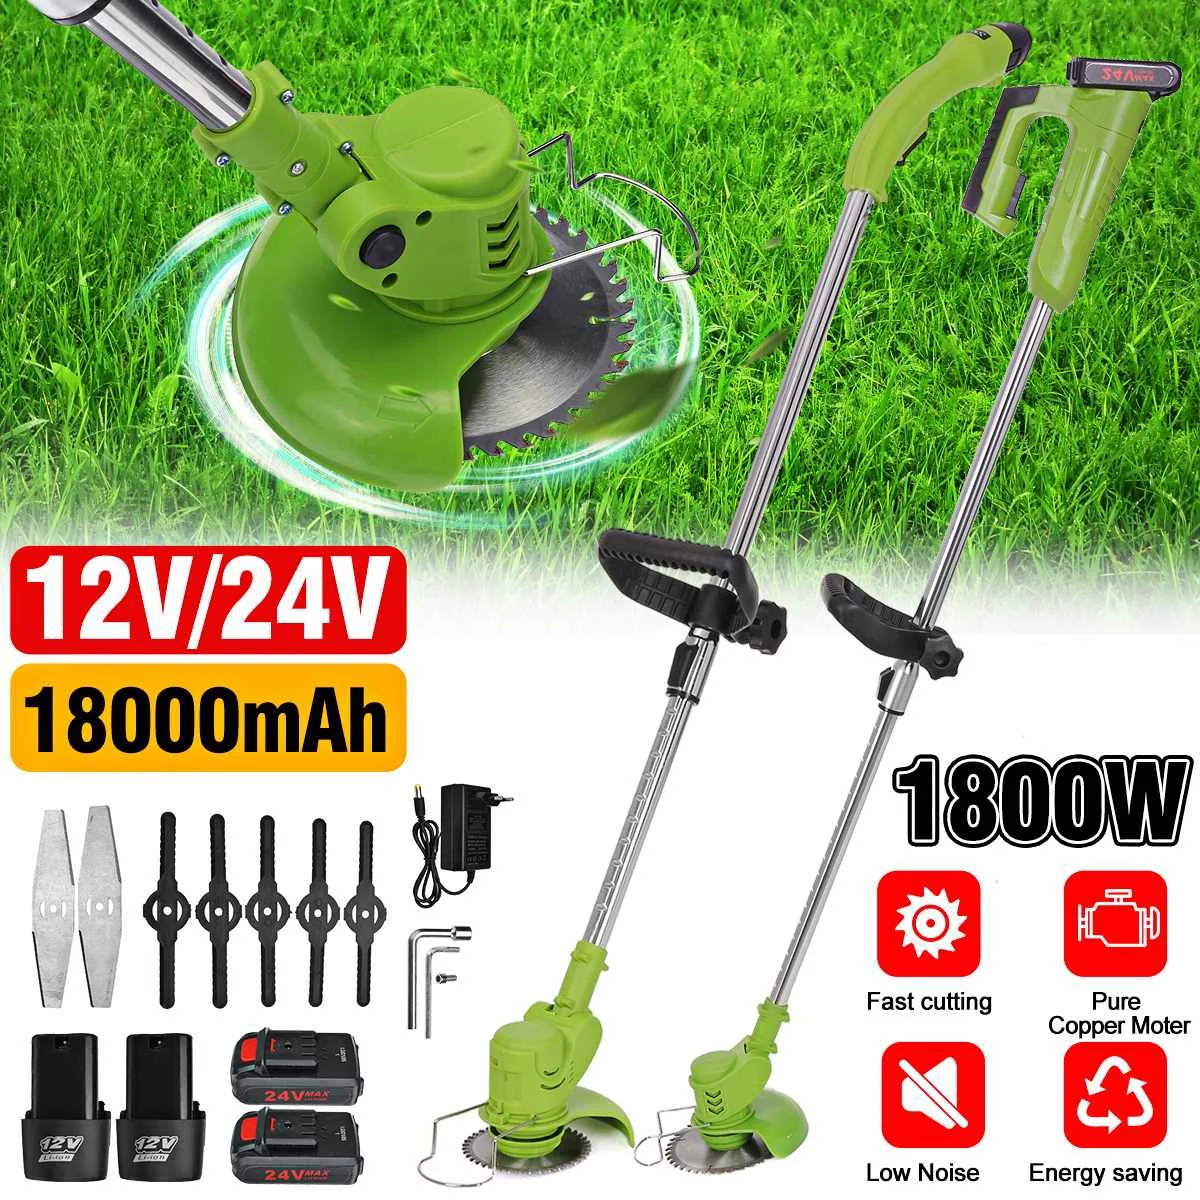 

24V 1800W Electric Lawn Mower Cordless Grass Trimmer Mowing Machine Grass Cutter Pruning Garden Power Tools With Li-ion Battery